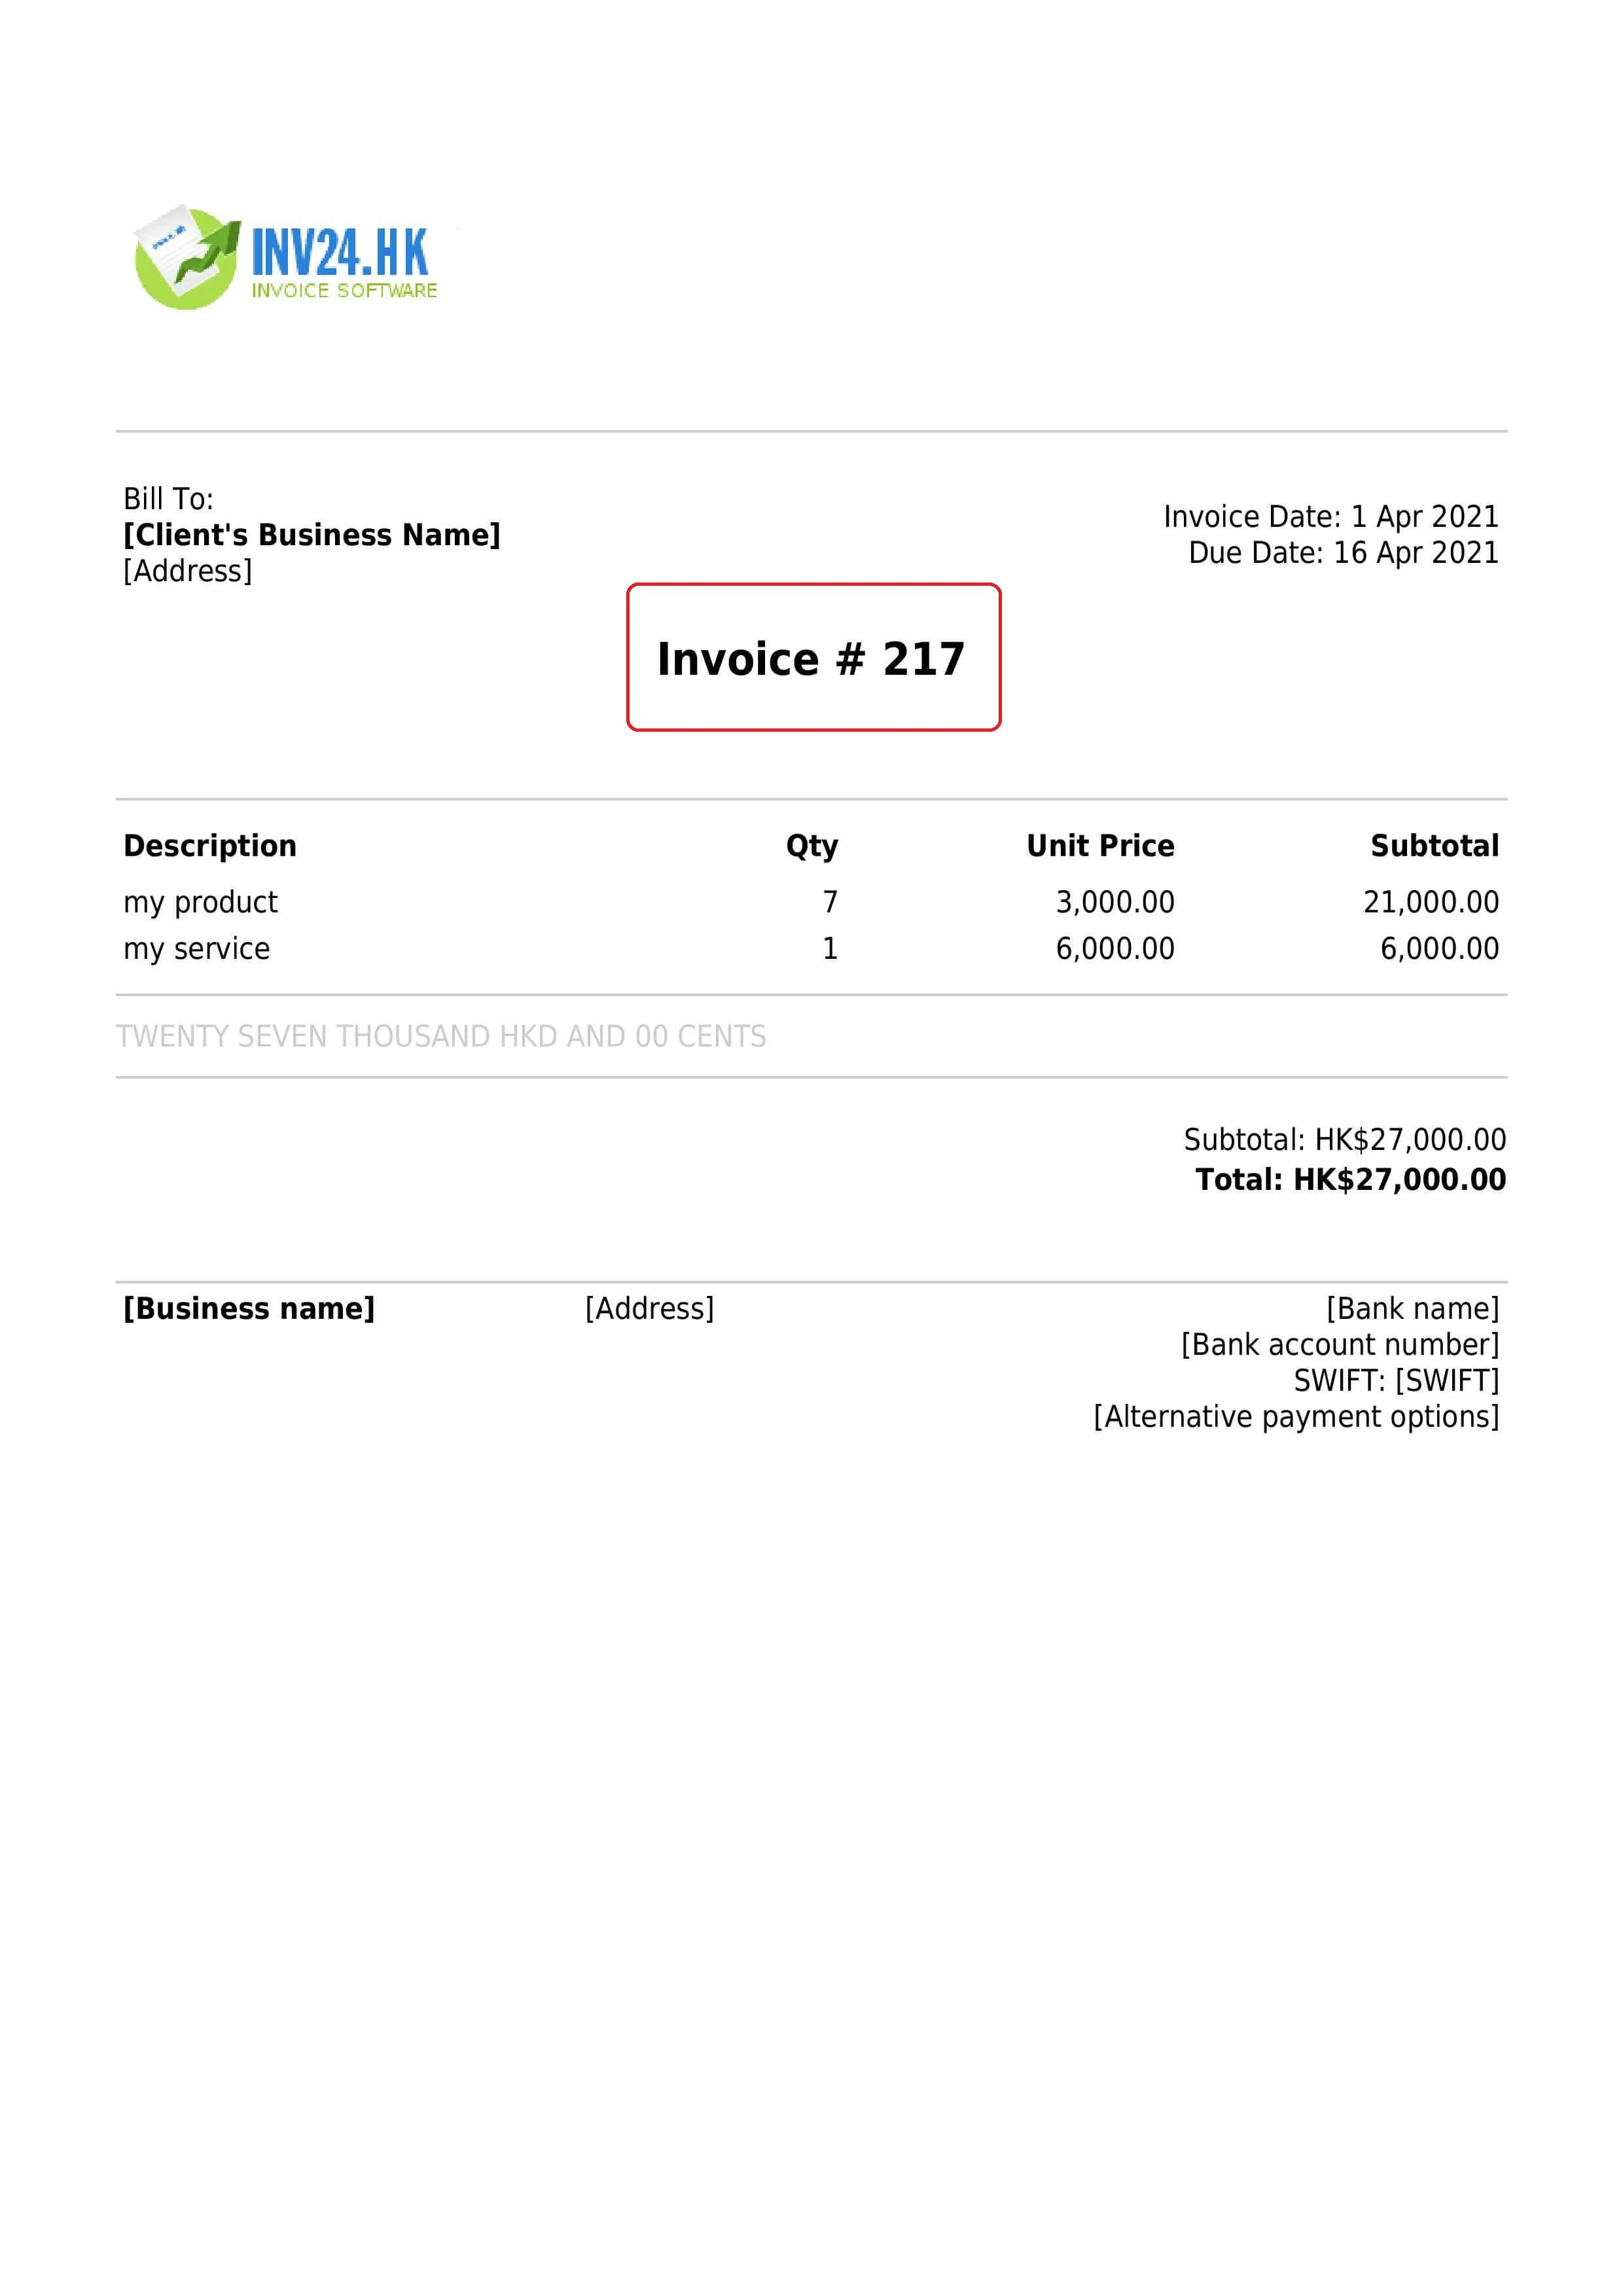 invoice number in Hong Kong